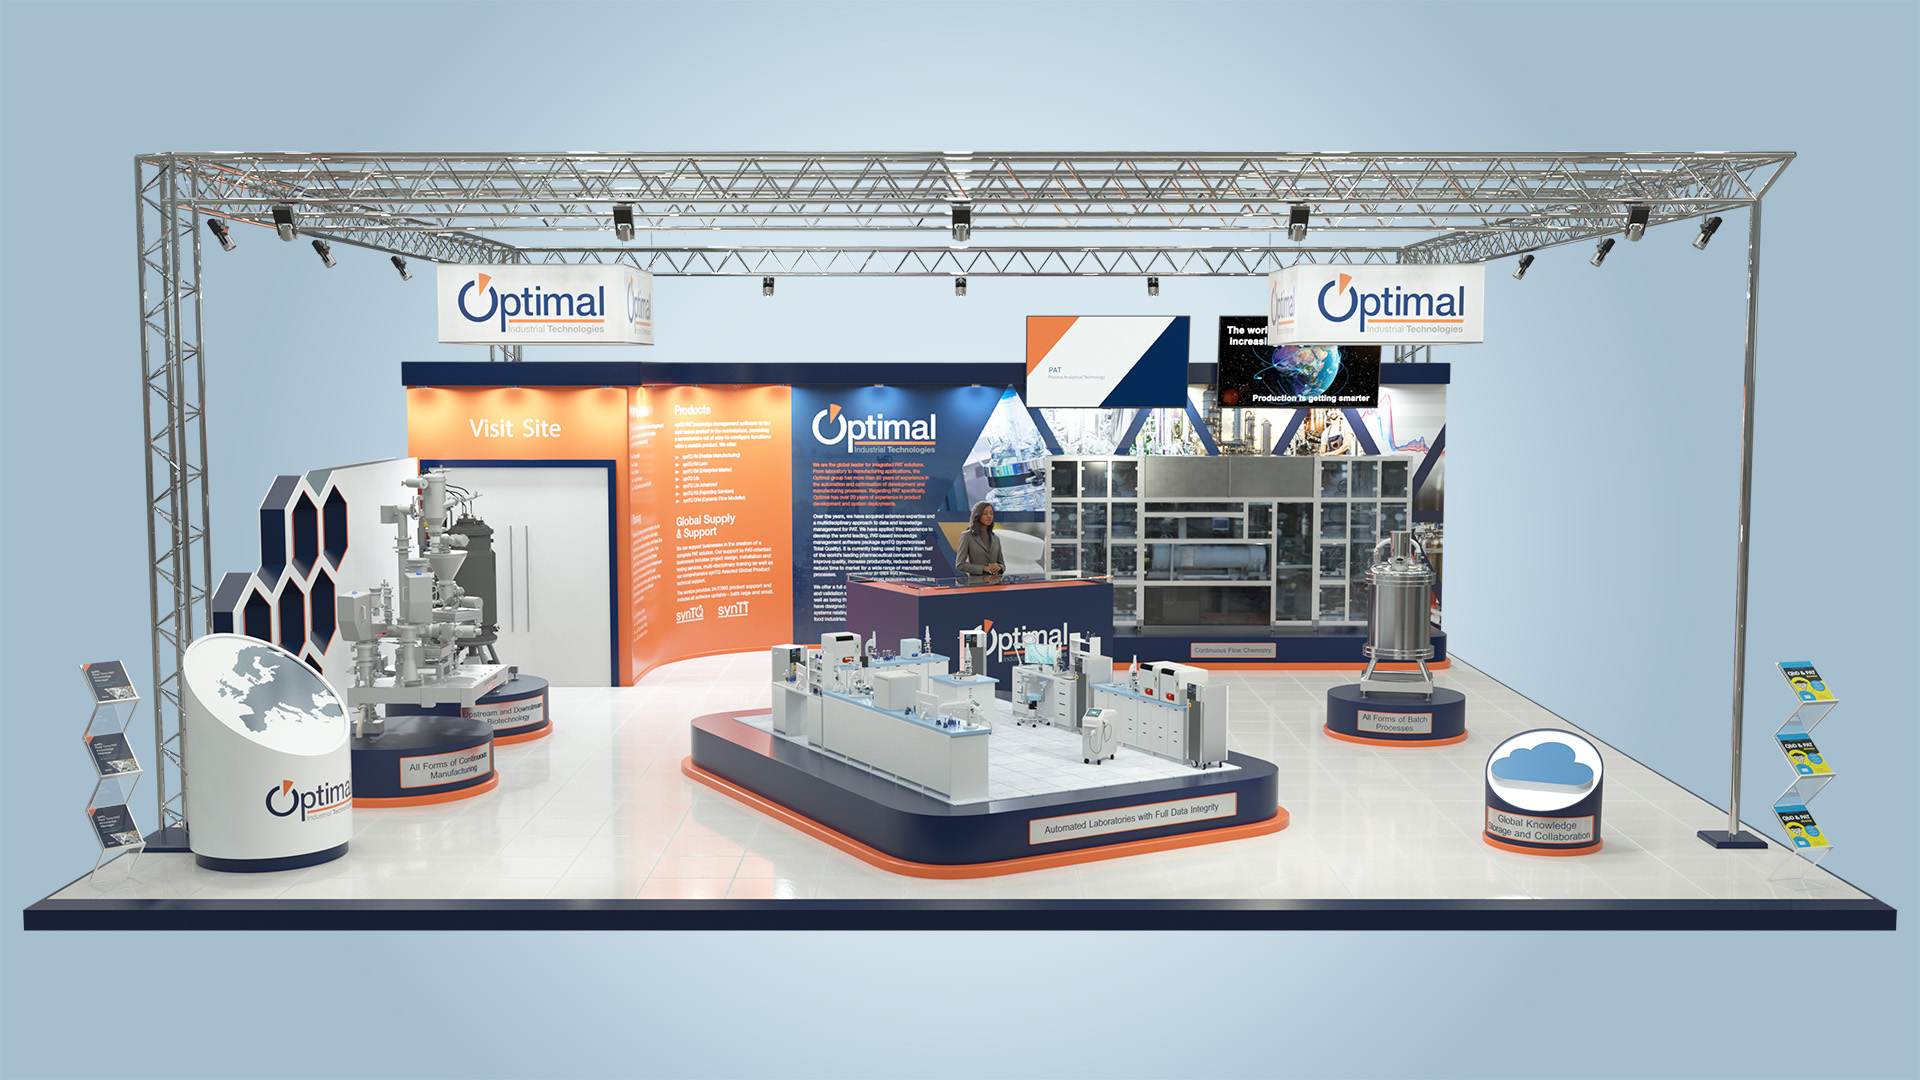 Optimal will exhibit at the CHEMUK 2021 supply-chain expo, taking place from 15th-16th September at NEC, Birmingham, UK.